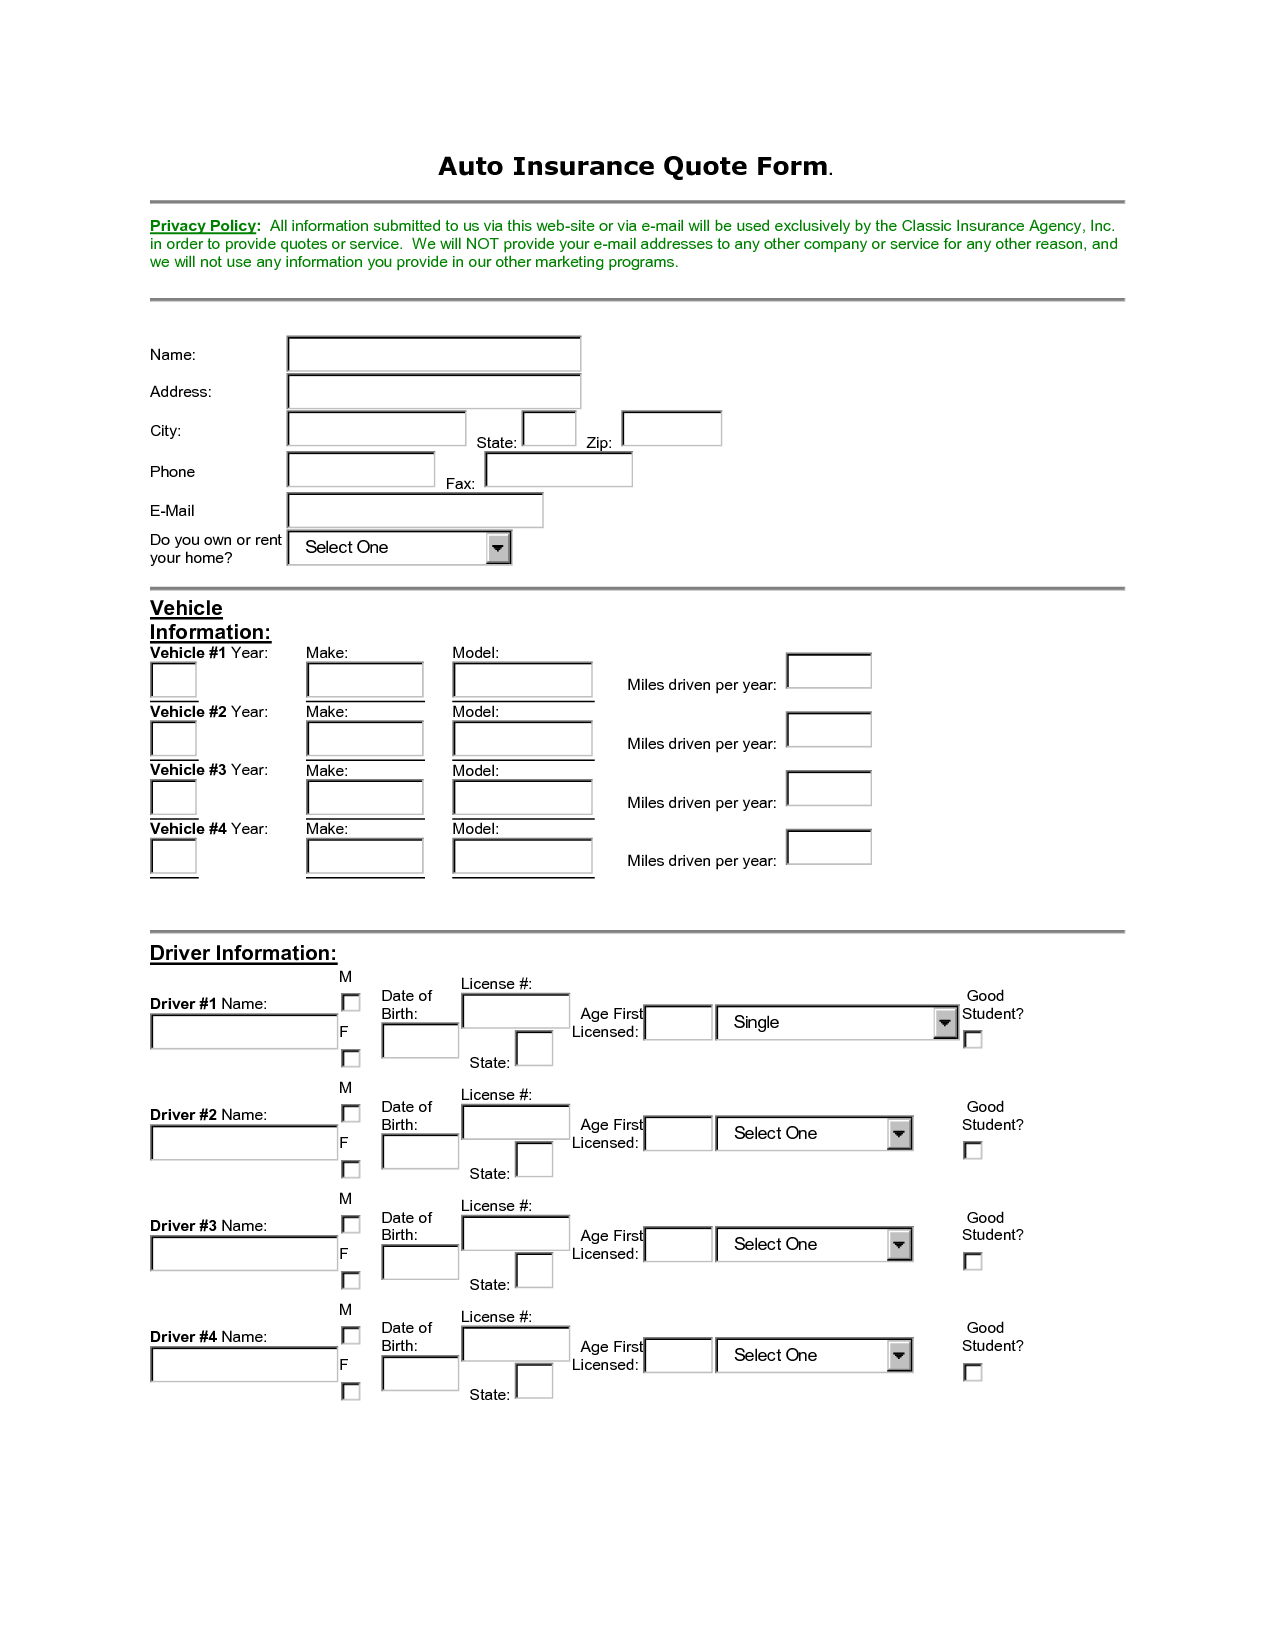 Life Insurance Quote Form 03